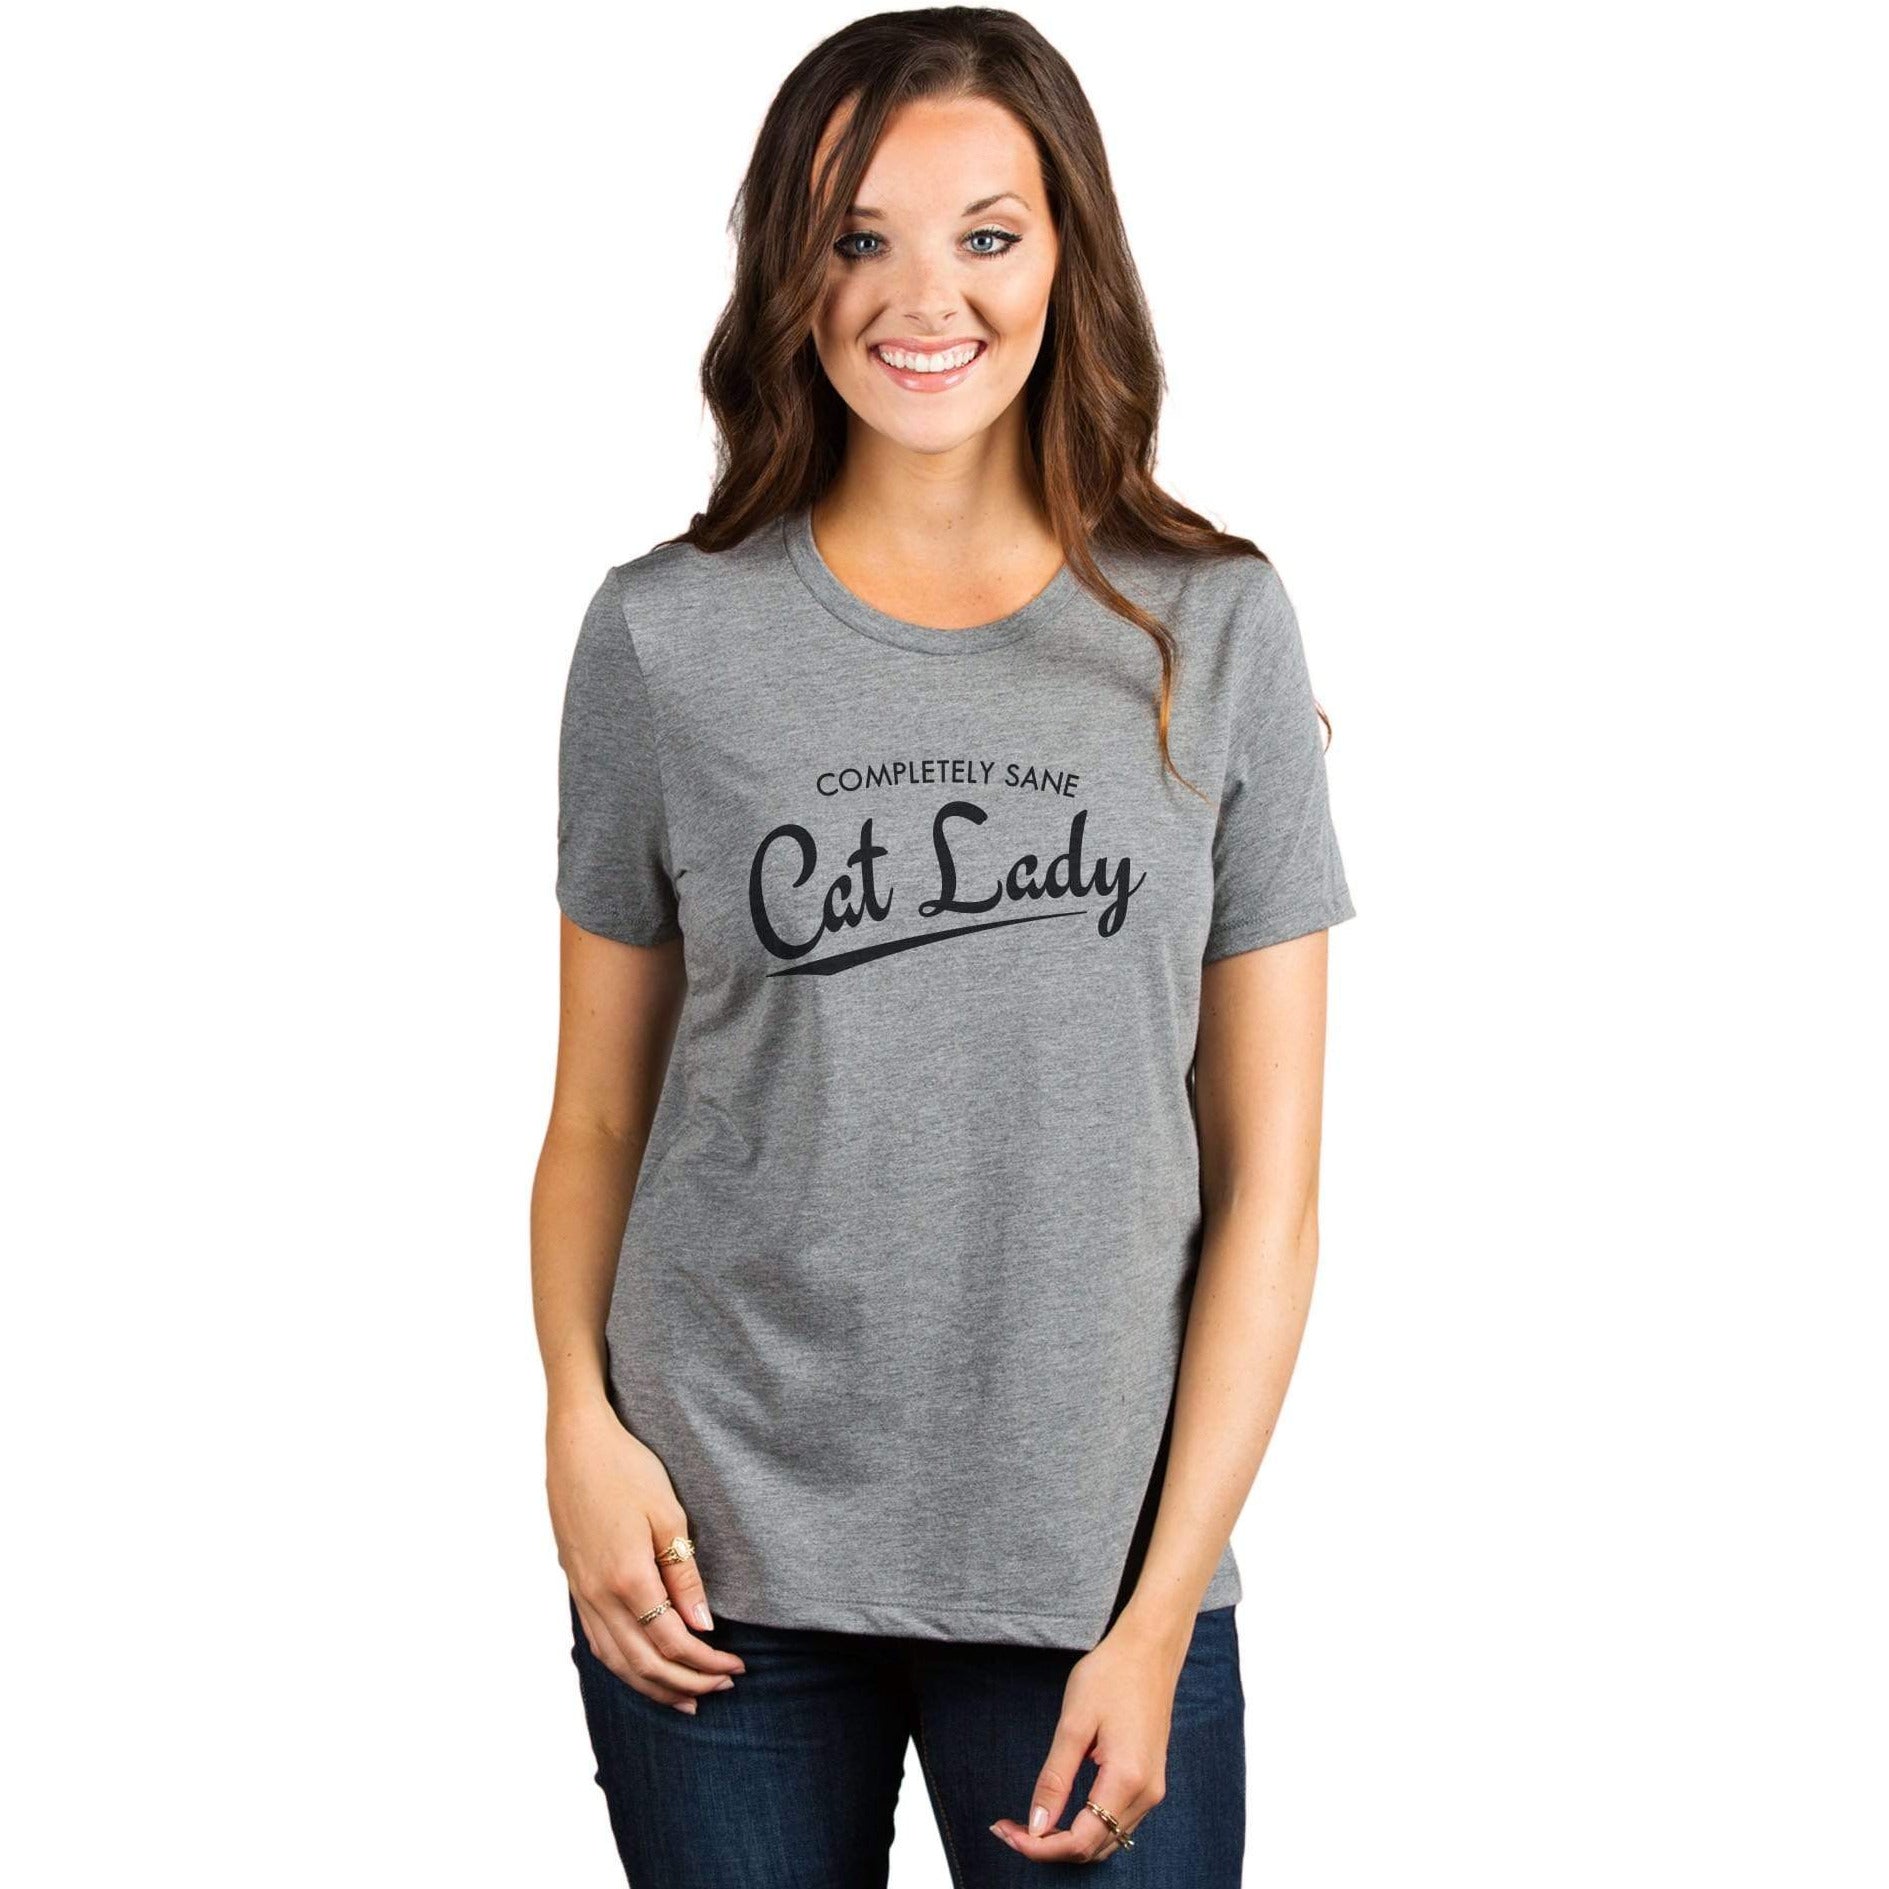 Completely Sane Cat Lady - Thread Tank | Stories You Can Wear | T-Shirts, Tank Tops and Sweatshirts